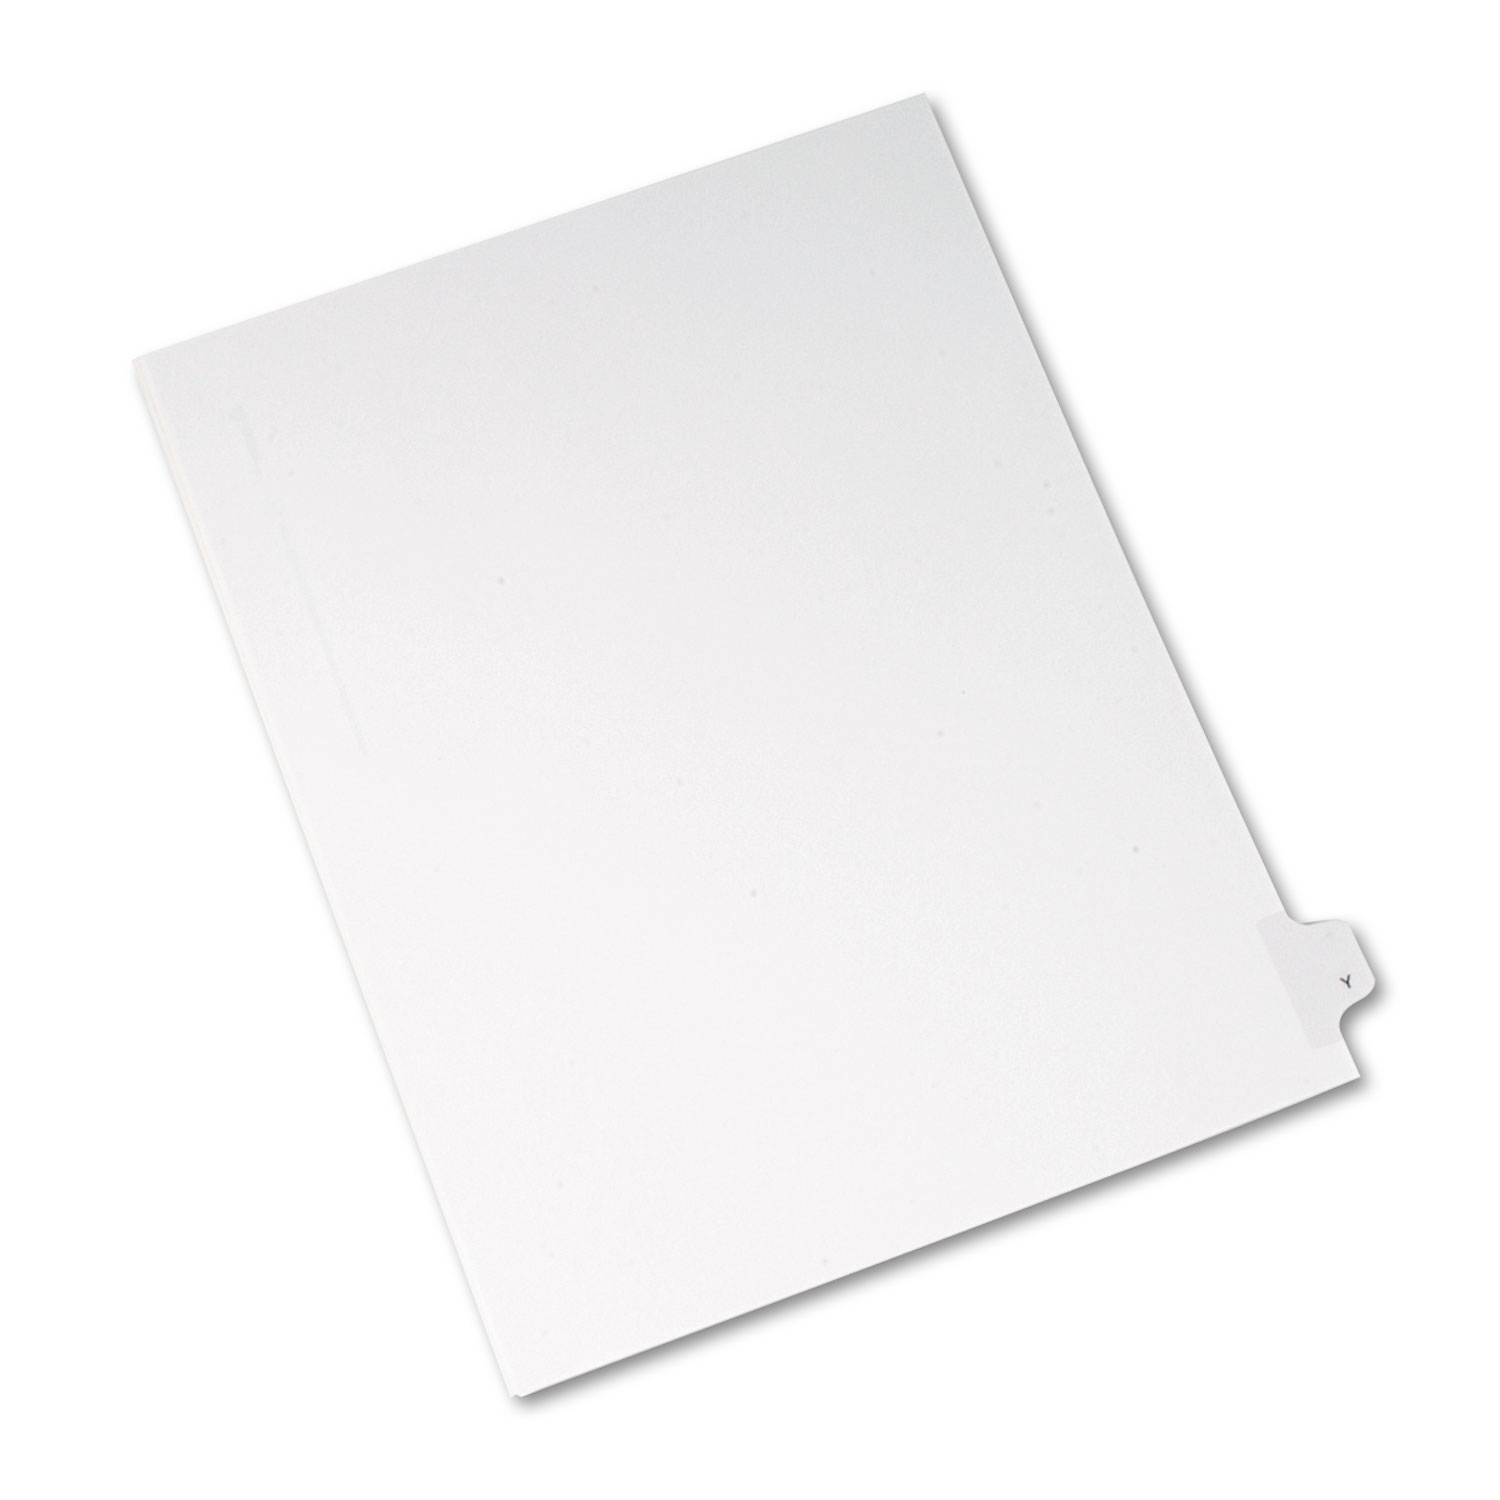 Allstate-Style Legal Exhibit Side Tab Divider, Title: Y, Letter, White, 25/Pack